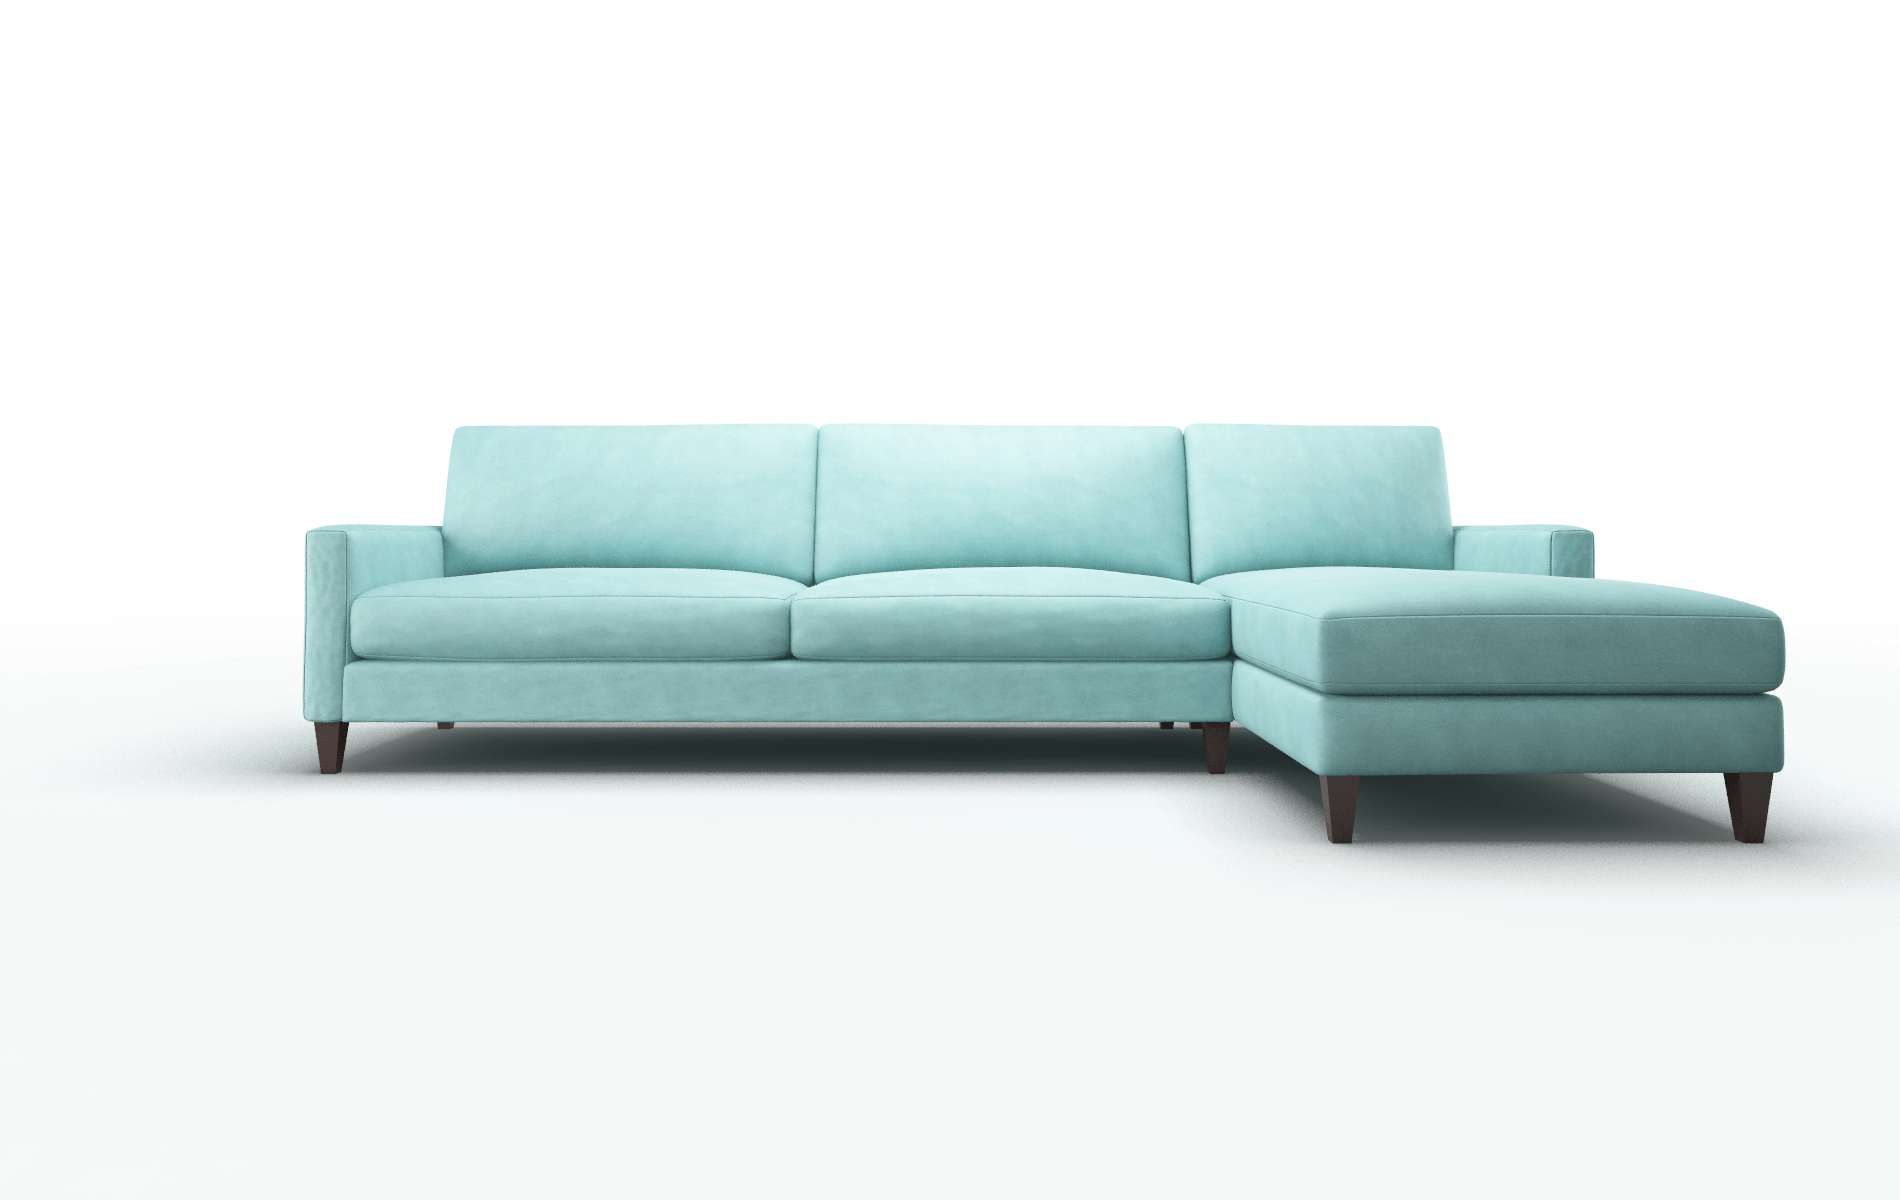 Cannes Curious Turquoise chair espresso legs